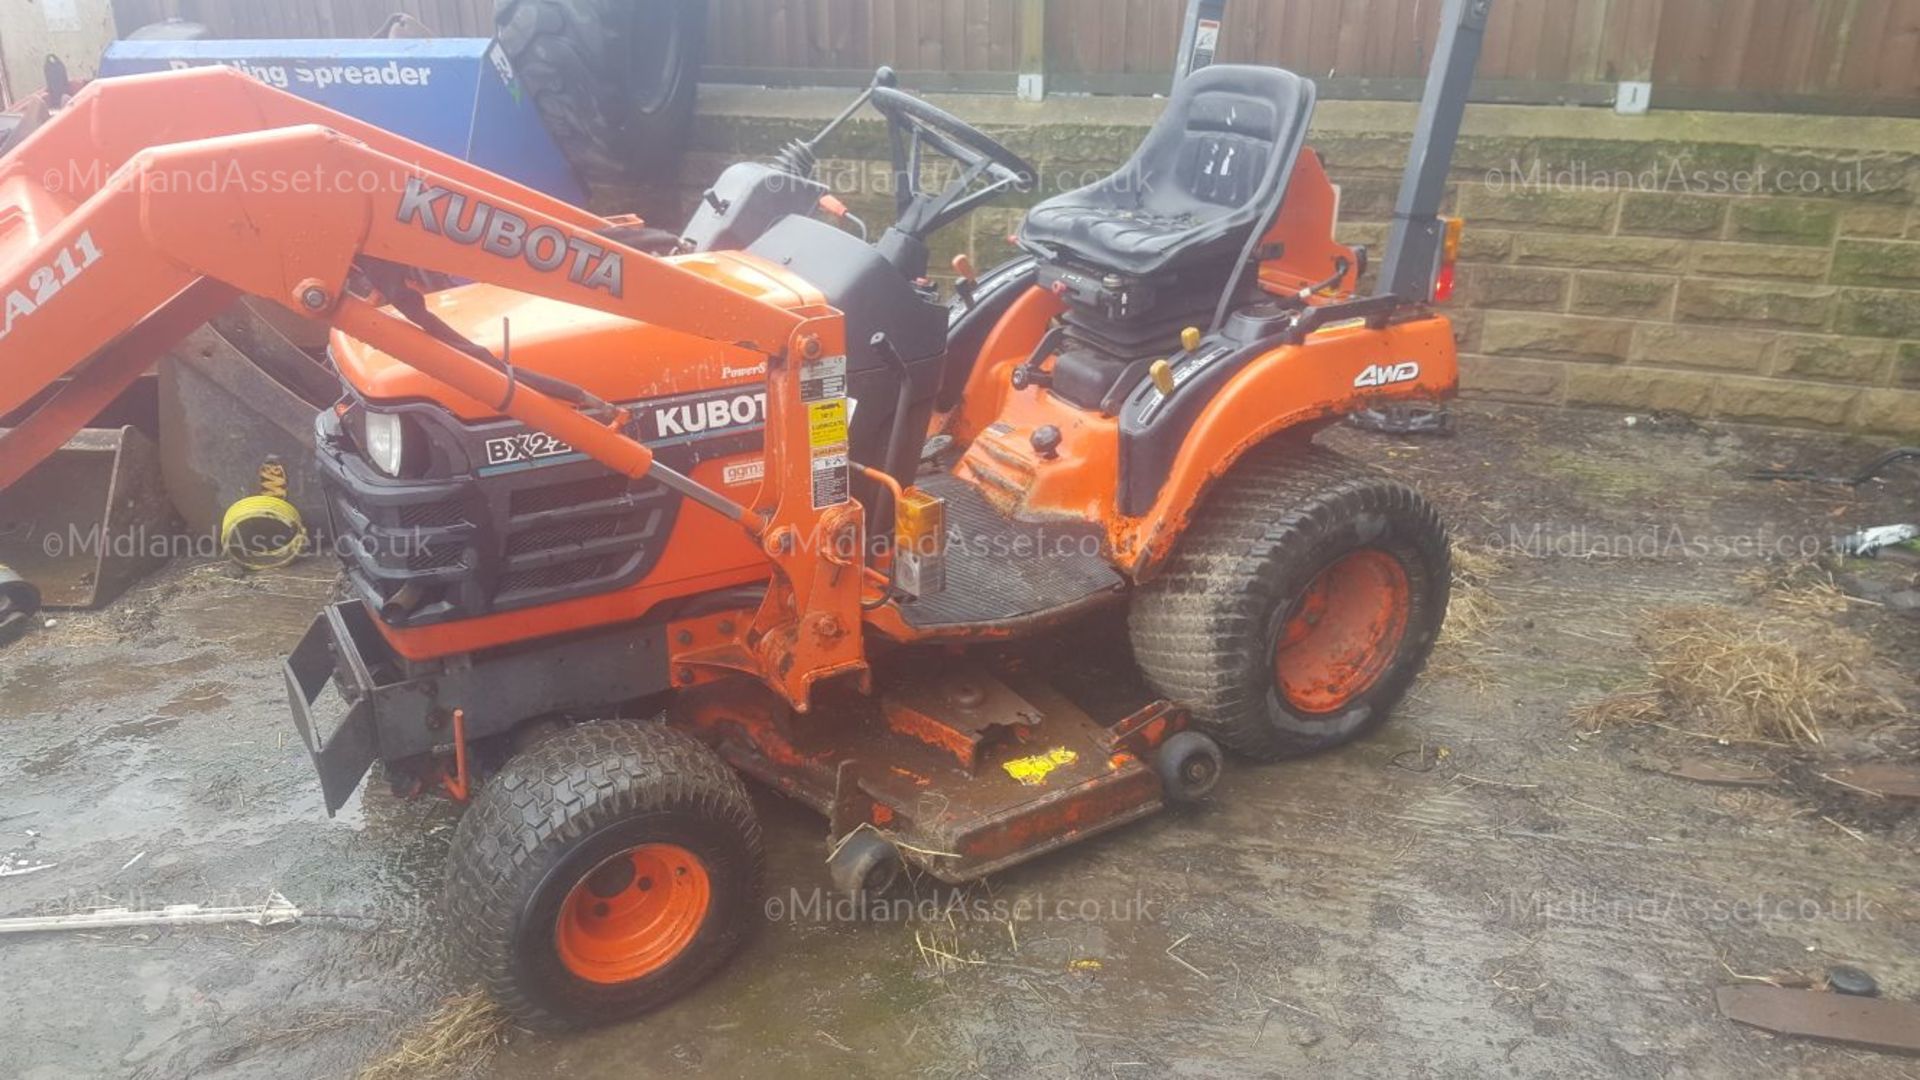 2005 KUBOTA BX2200 TRACTOR MOWER FITTED WITH LA211-1-EU LOADER, STARTS, DRIVES, MOWS AND LIFTS - Image 2 of 12